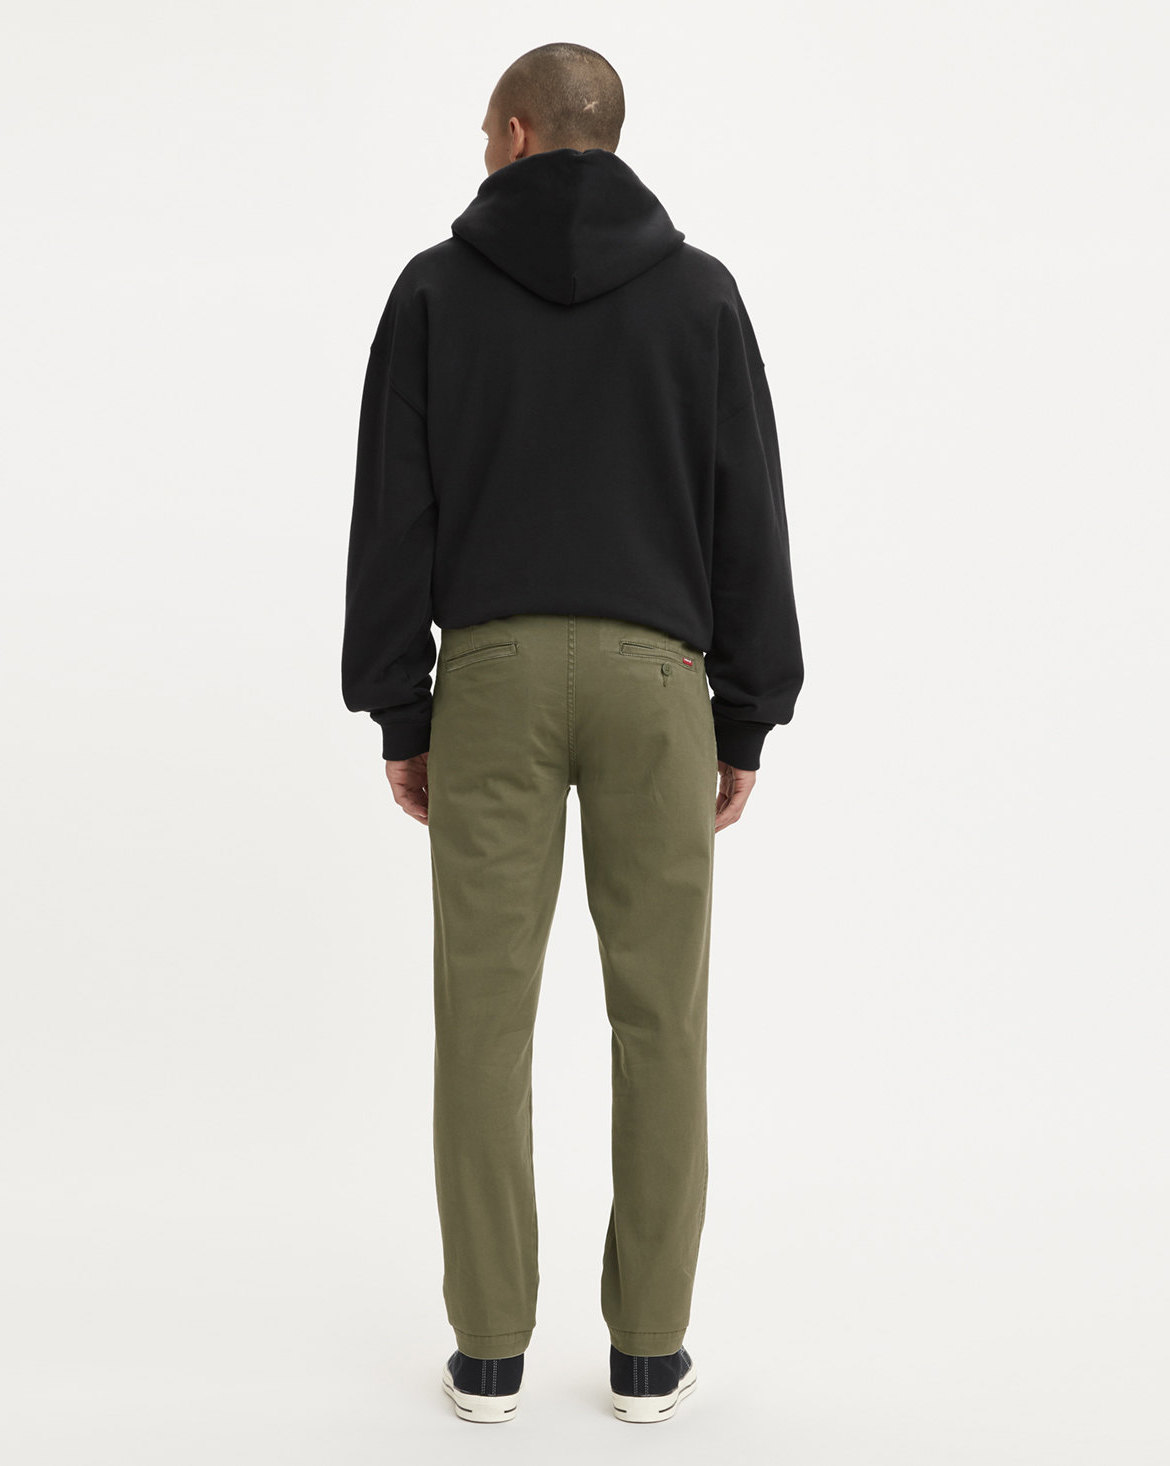 XX Chino Relaxed Taper Pants | Levi